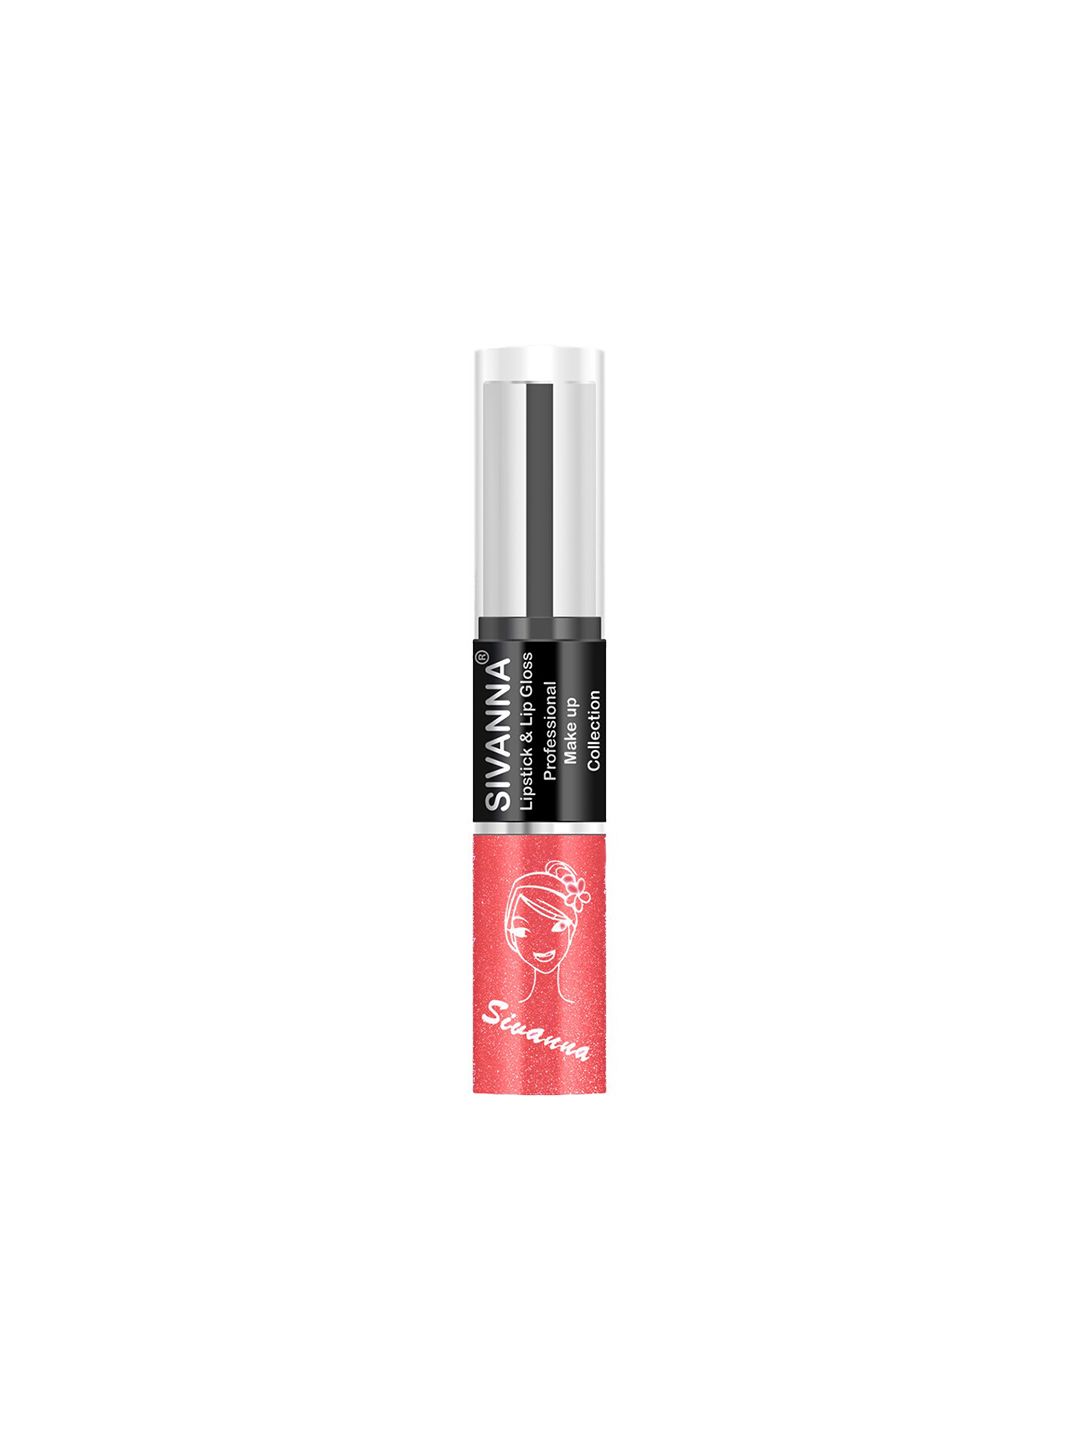 Sivanna Colors 2-in-1 Professional Makeup Lipstick & Lip Gloss - DK061 22 Price in India